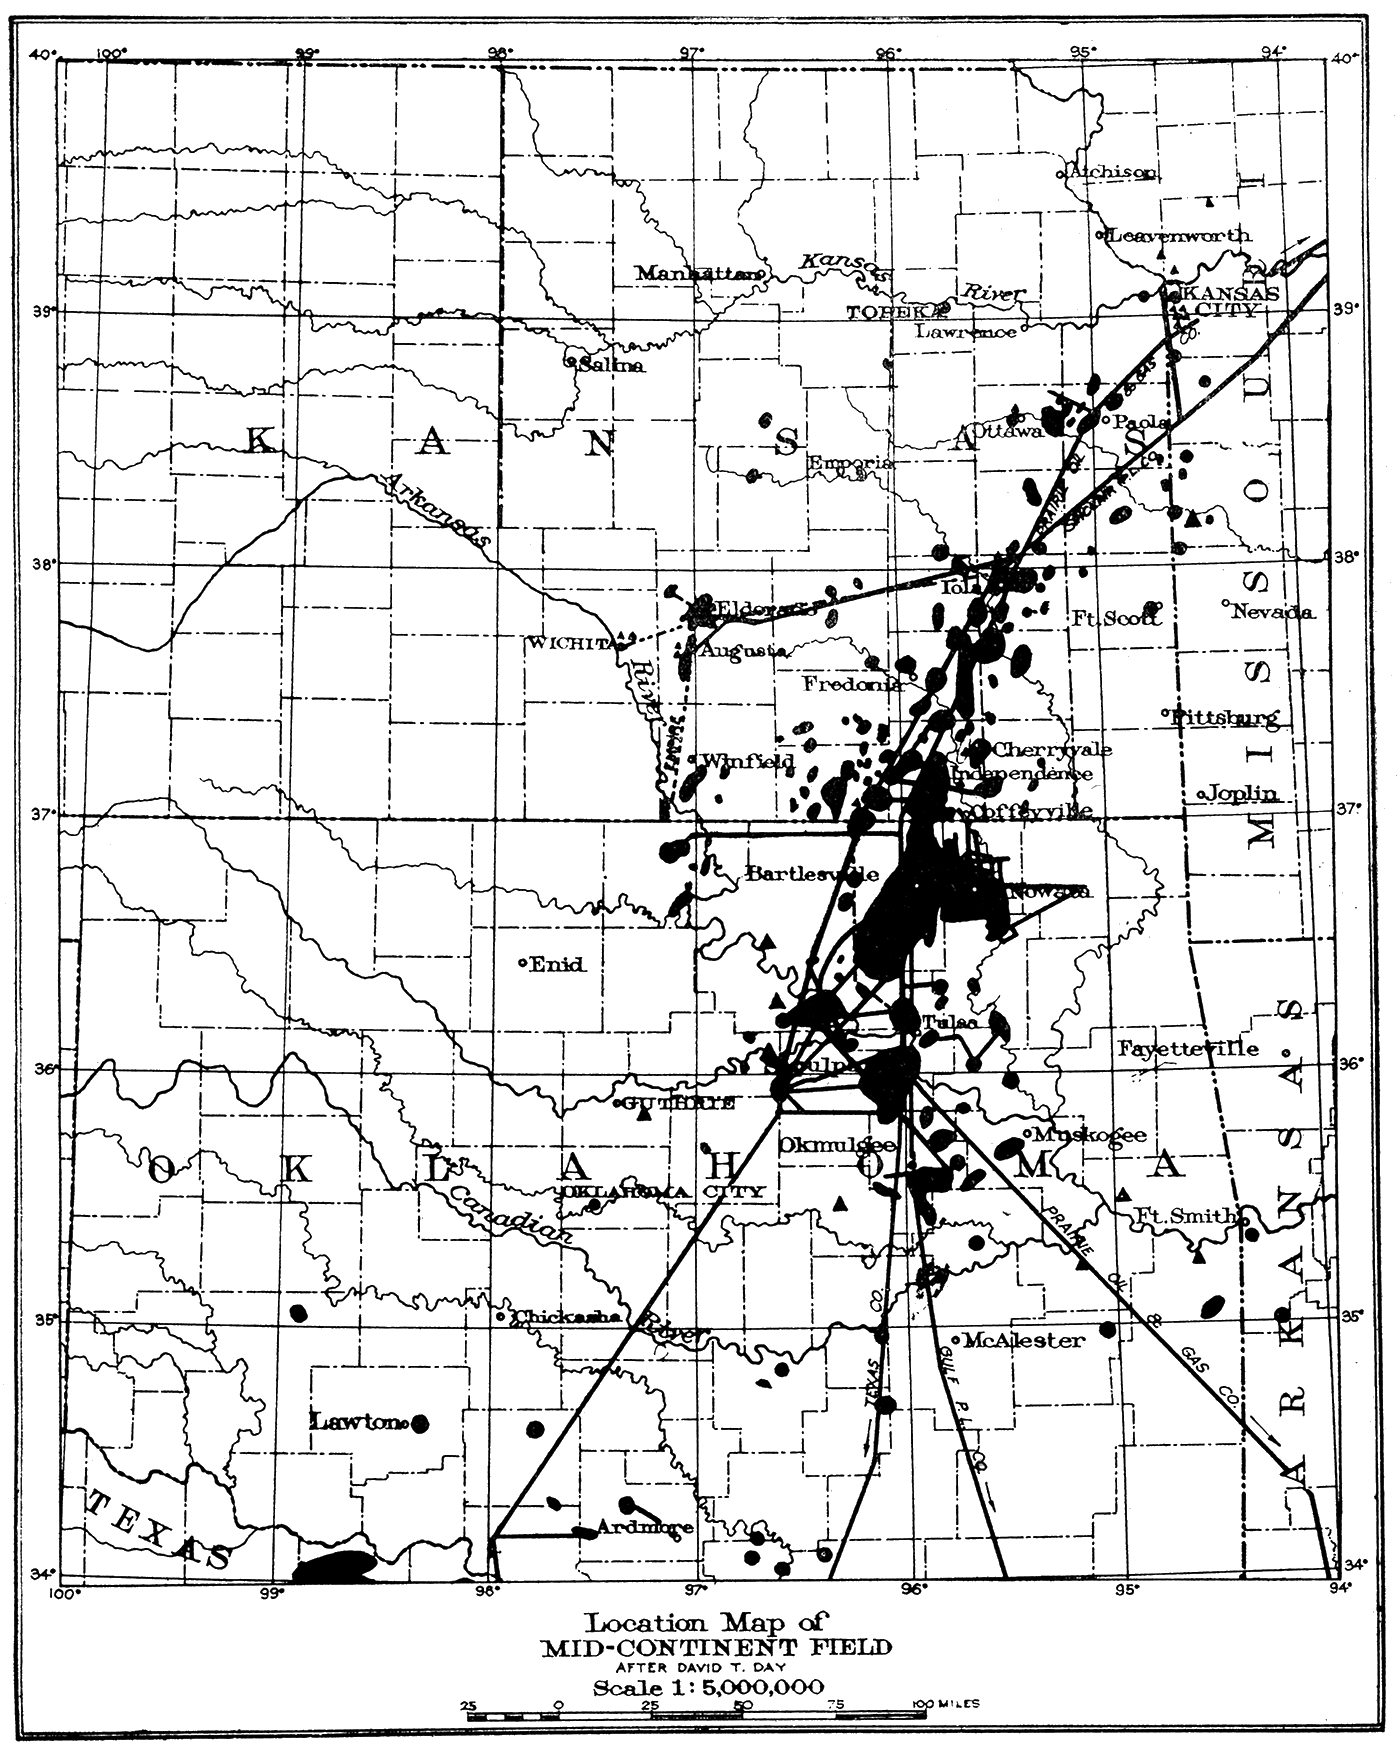 Location Map of Midcontinent Field.